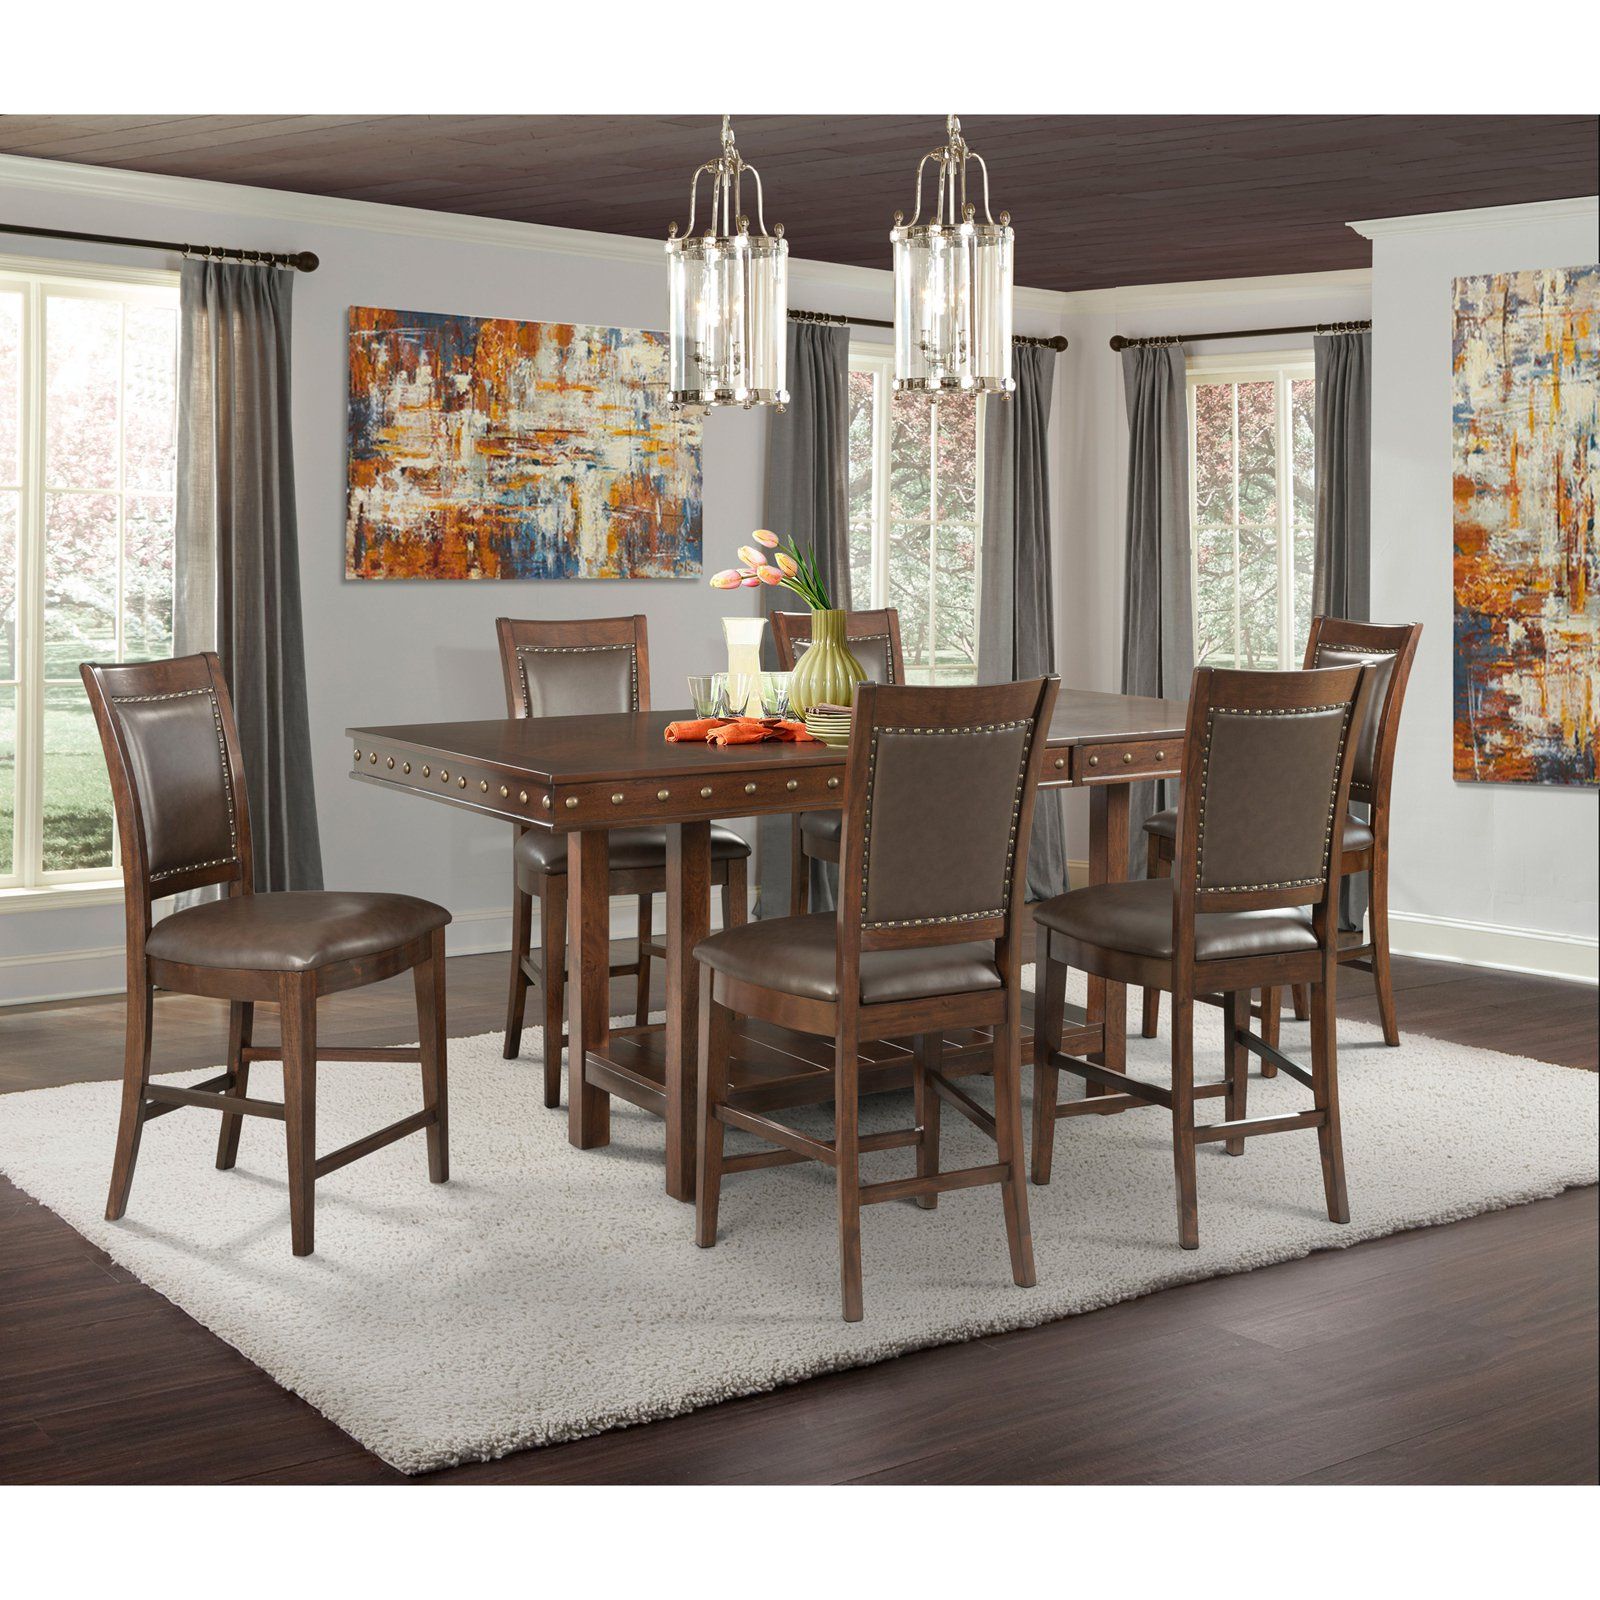 2019 7 Piece Extendable Dining Sets Intended For Picket House Furnishings Pruitt 7 Piece Counter Height Extension Dining (View 4 of 15)